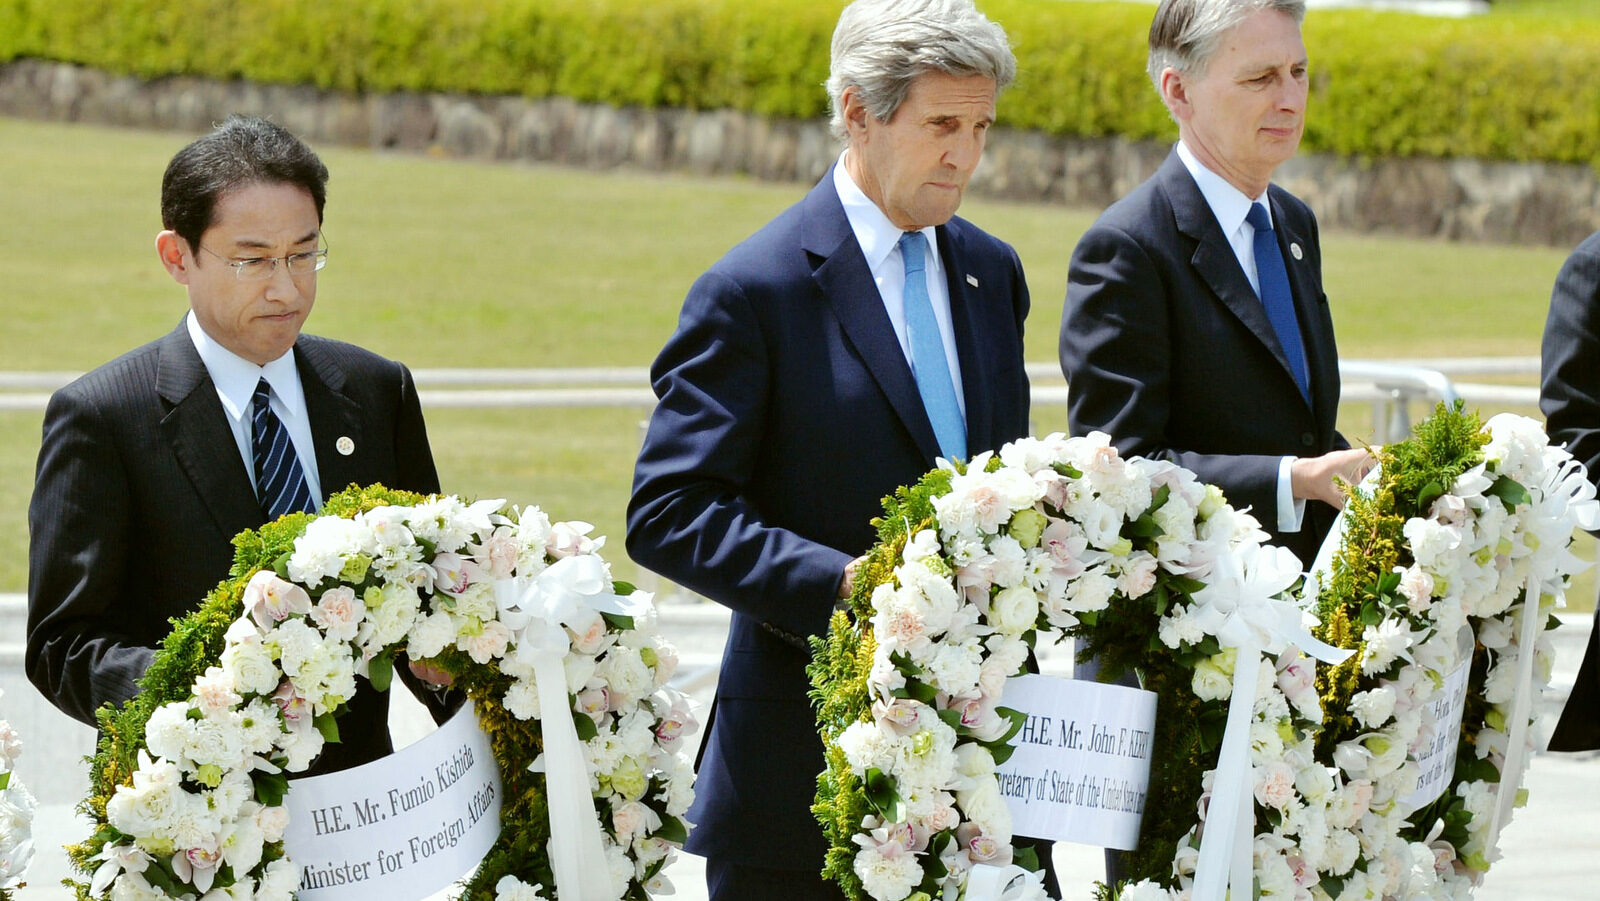 From left, Japan's Foreign Minister Fumio Kishida, U.S. Secretary of State John Kerry and Britain's Foreign Minister Philip Hammond carry wreath to offer at the cenotaph at Hiroshima Peace Memorial Park in Hiroshima, western Japan Monday, April 11, 2016. (Kyodo News via AP)